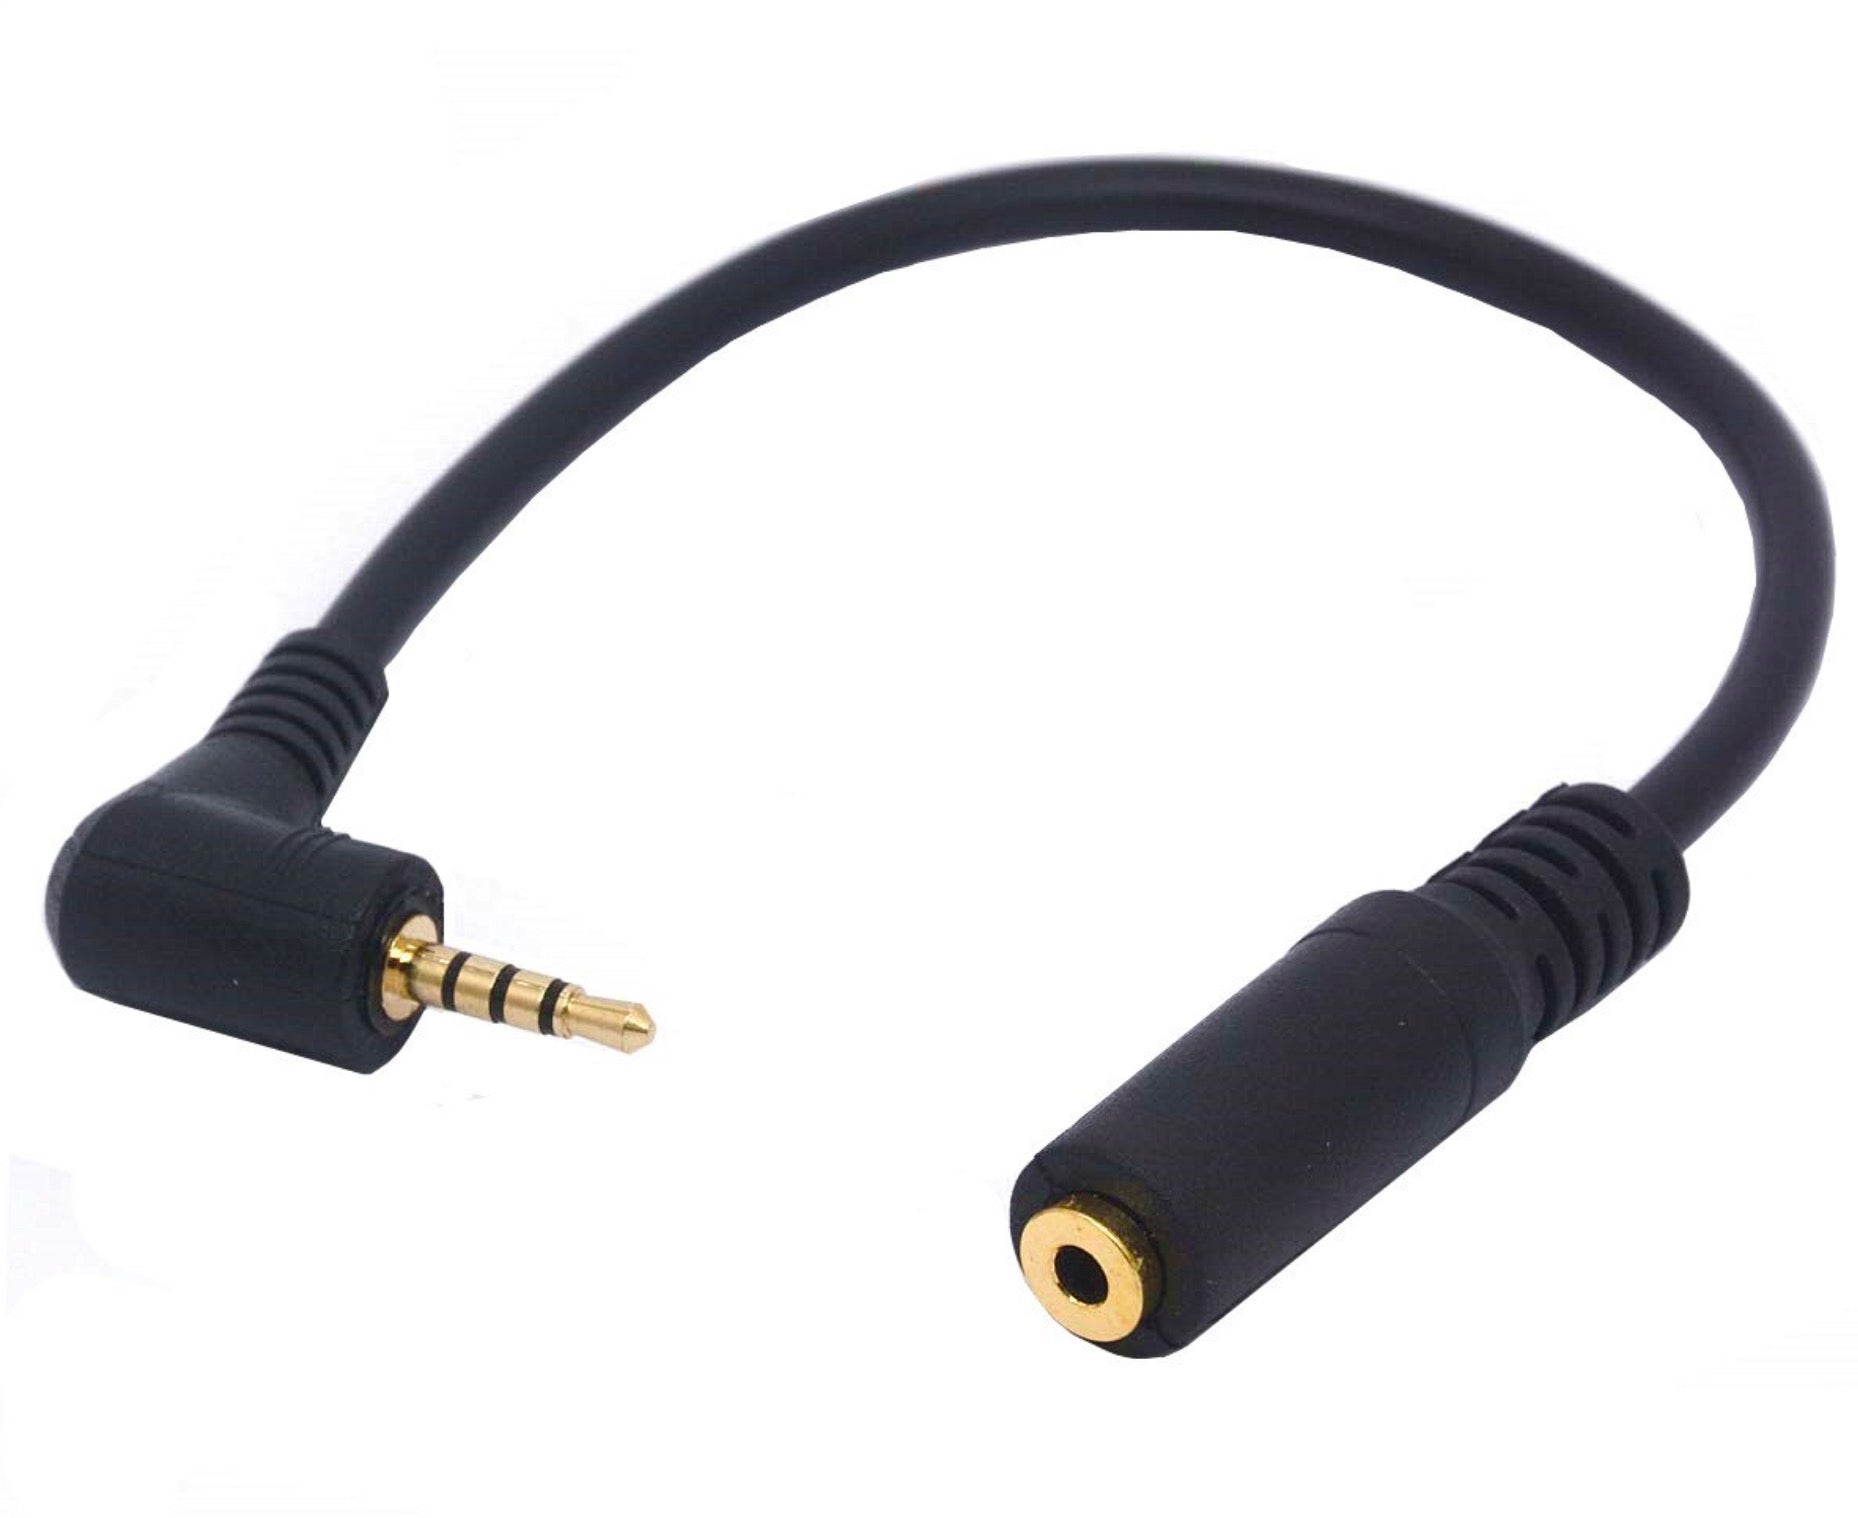 2.5mm 4 Pole Male to 2.5mm 4 Pole Female Headphone Audio Cable 0.2m